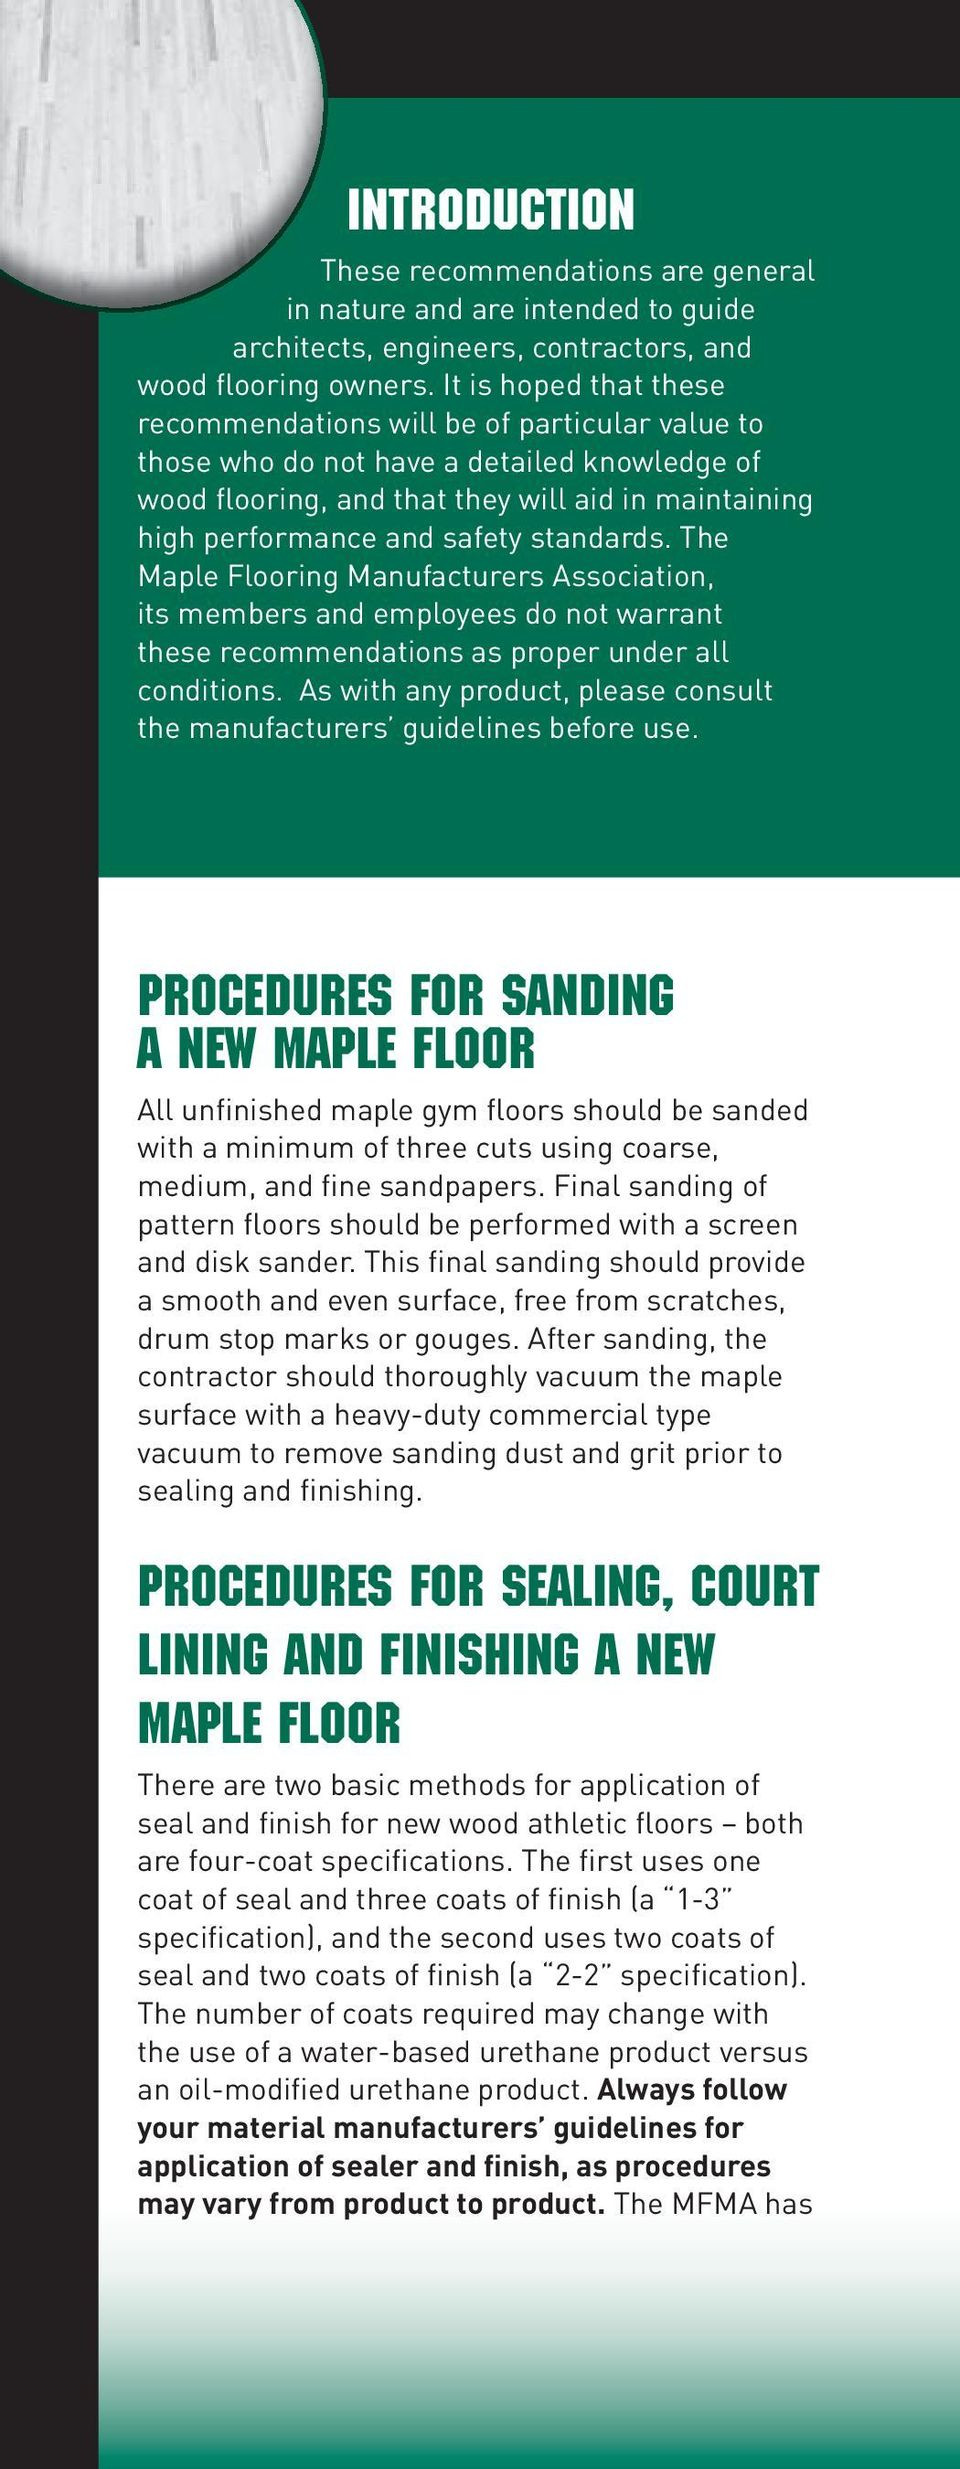 Hardwood Floor Refinishing Dayton Oh Of Industry Recommendations for Sanding Sealing Court Lining Intended for the Maple Flooring Manufacturers association Its Members and Employees Do Not Warrant these